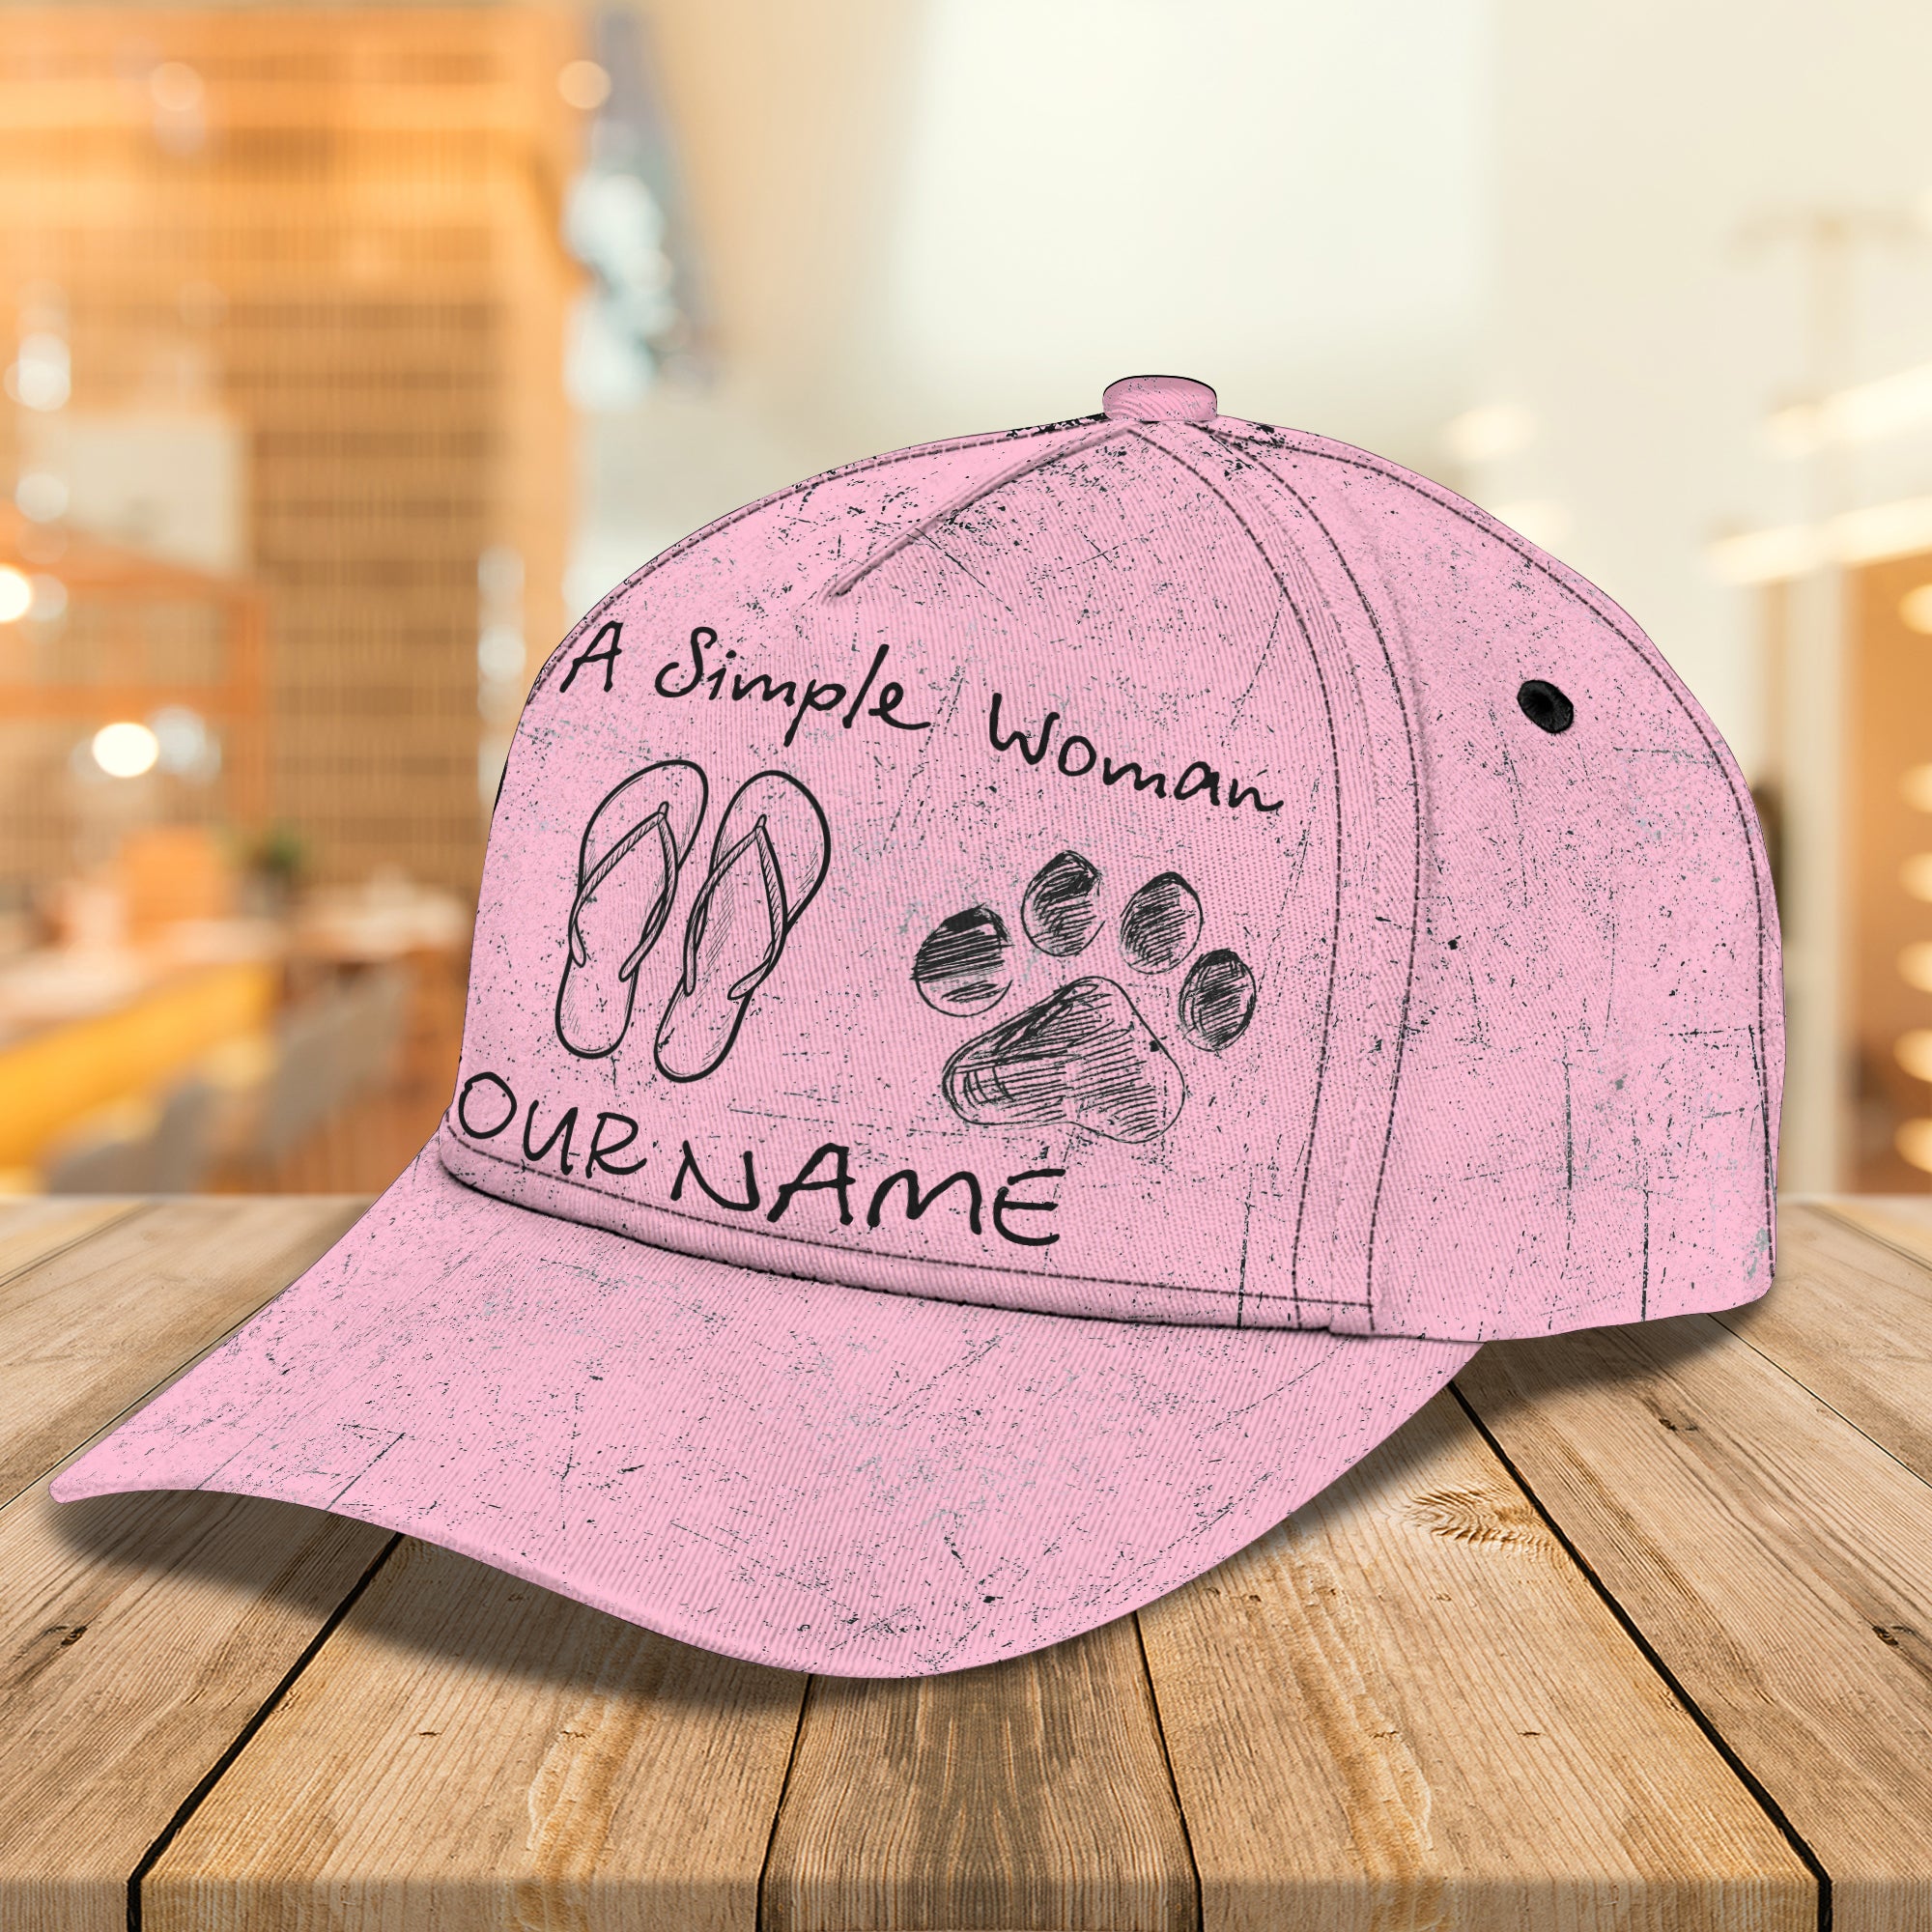 I Am A Simple Woman - Personalized Name Cap 8 - Bhn97